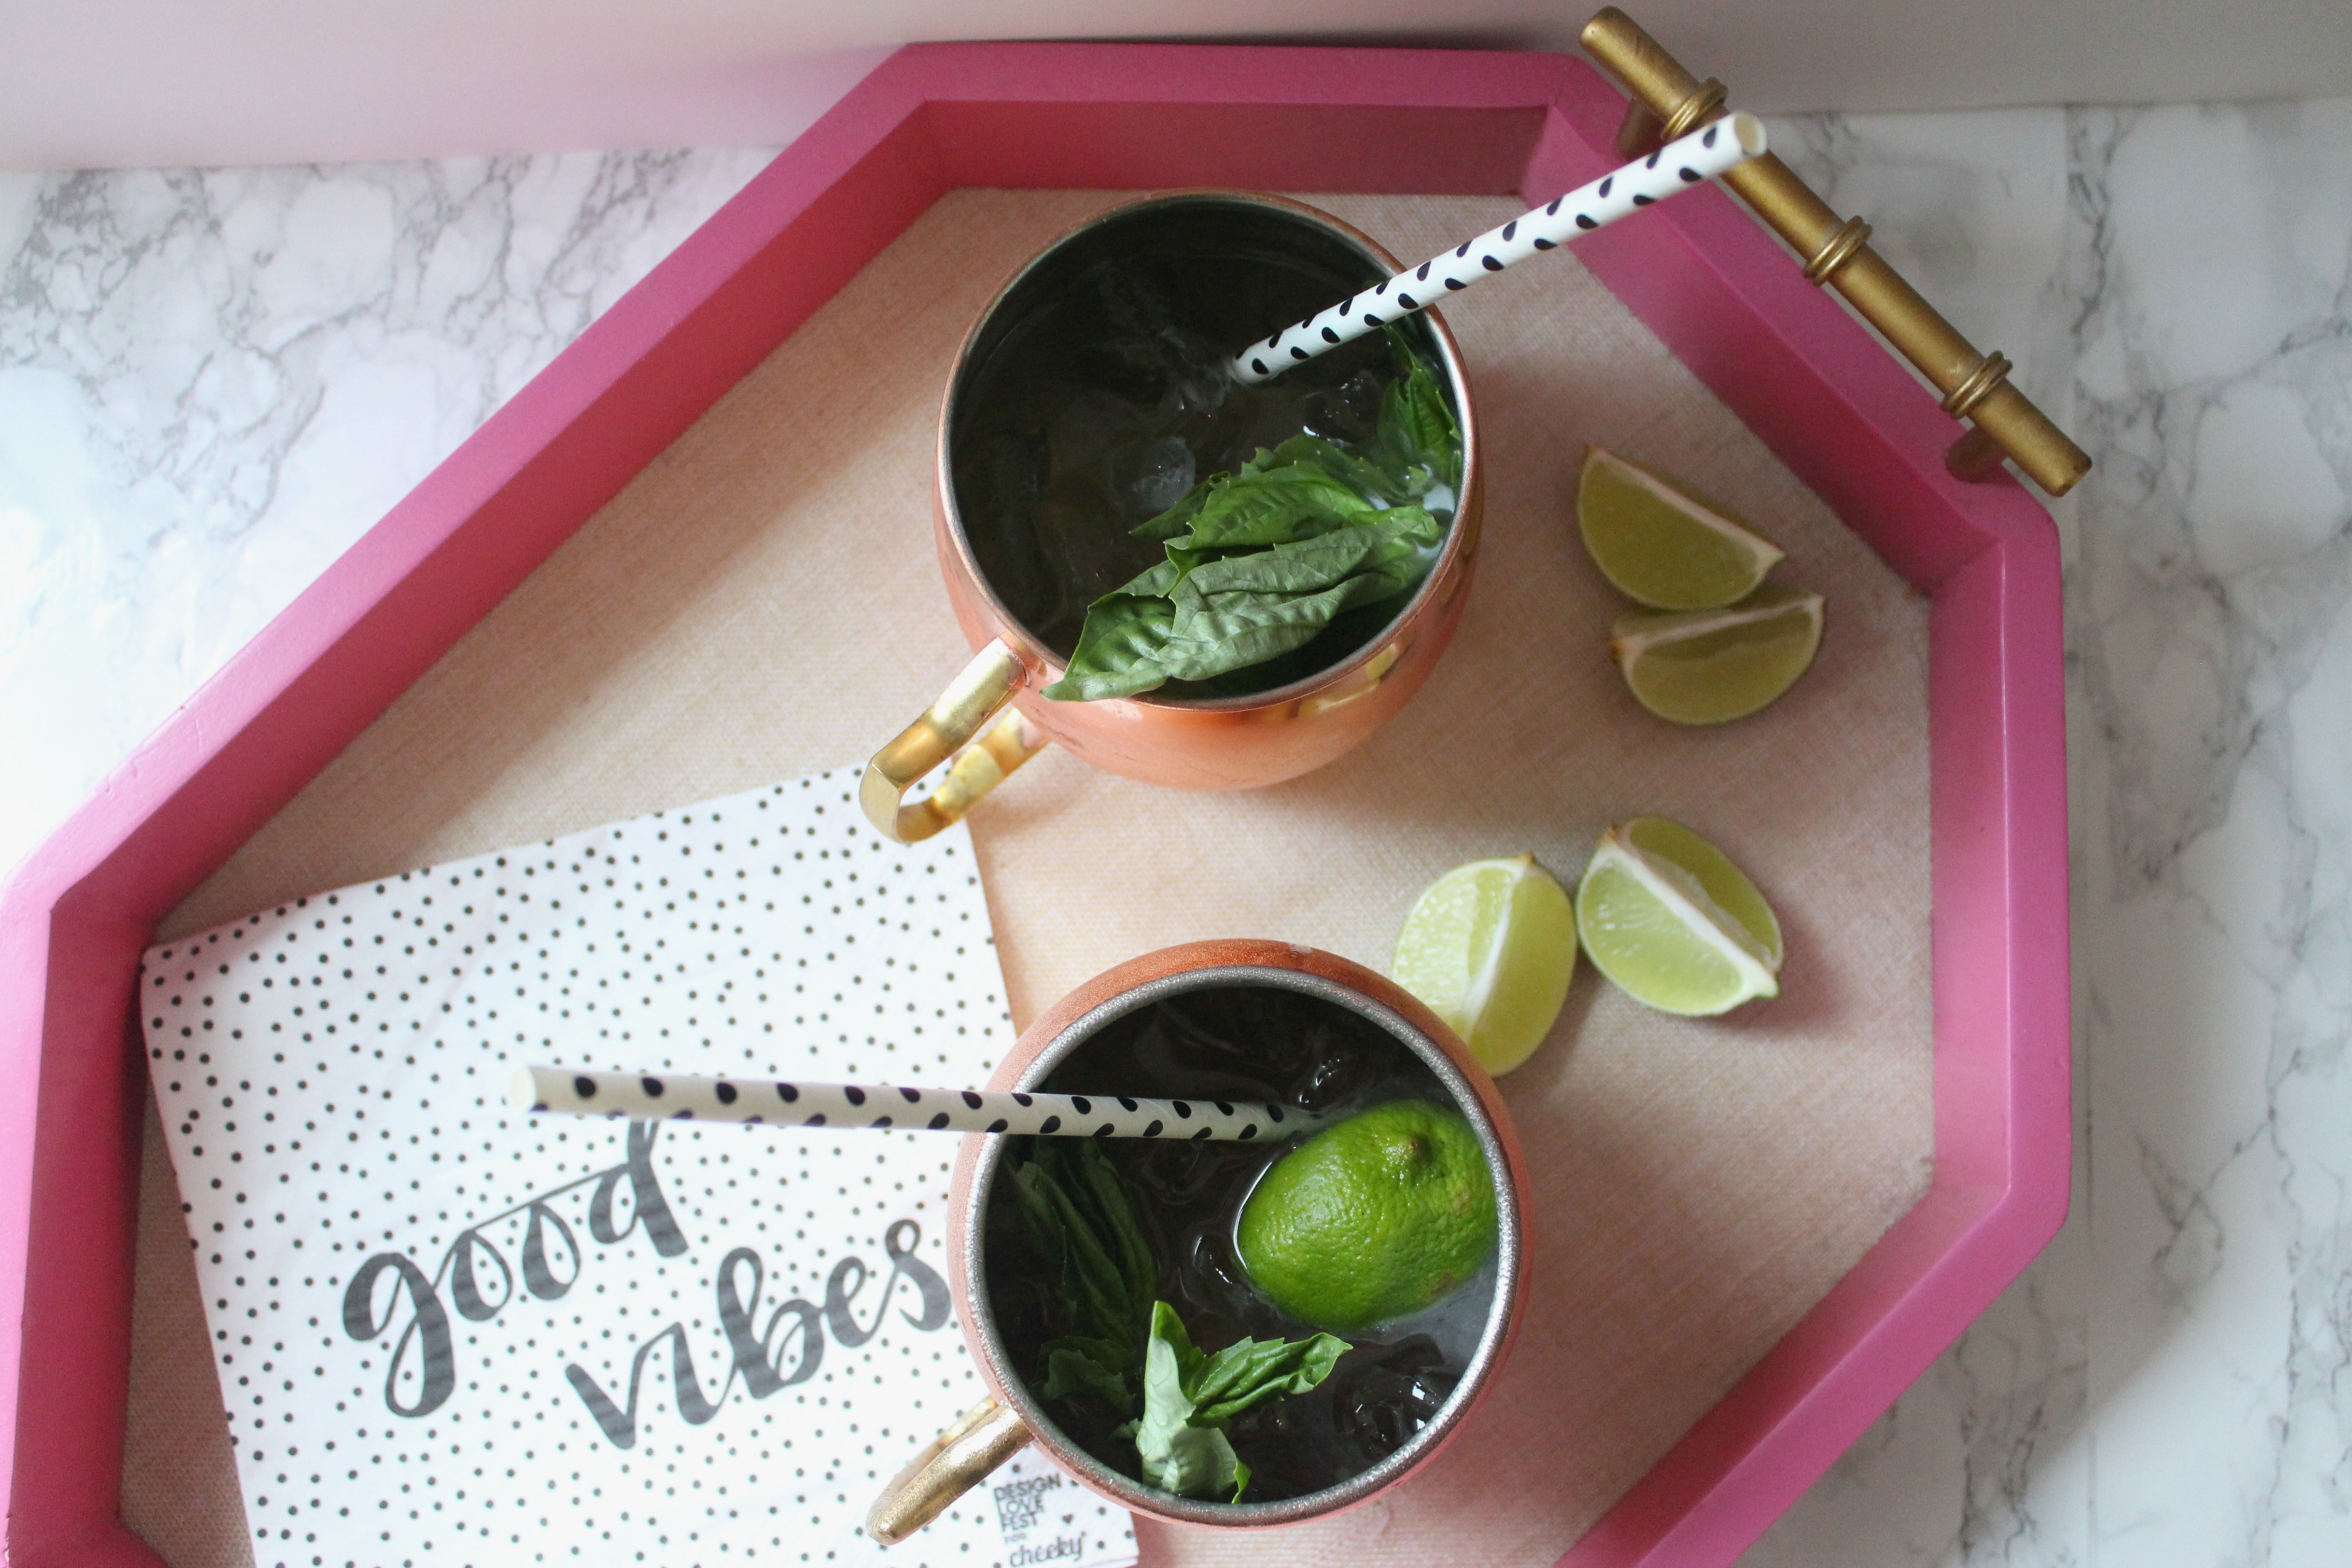 Serving your Moscow mule is a traditional copper mug keeps it authentic and really cold. But don't worry, Moscow mules are still enjoyable even without the copper mugs.